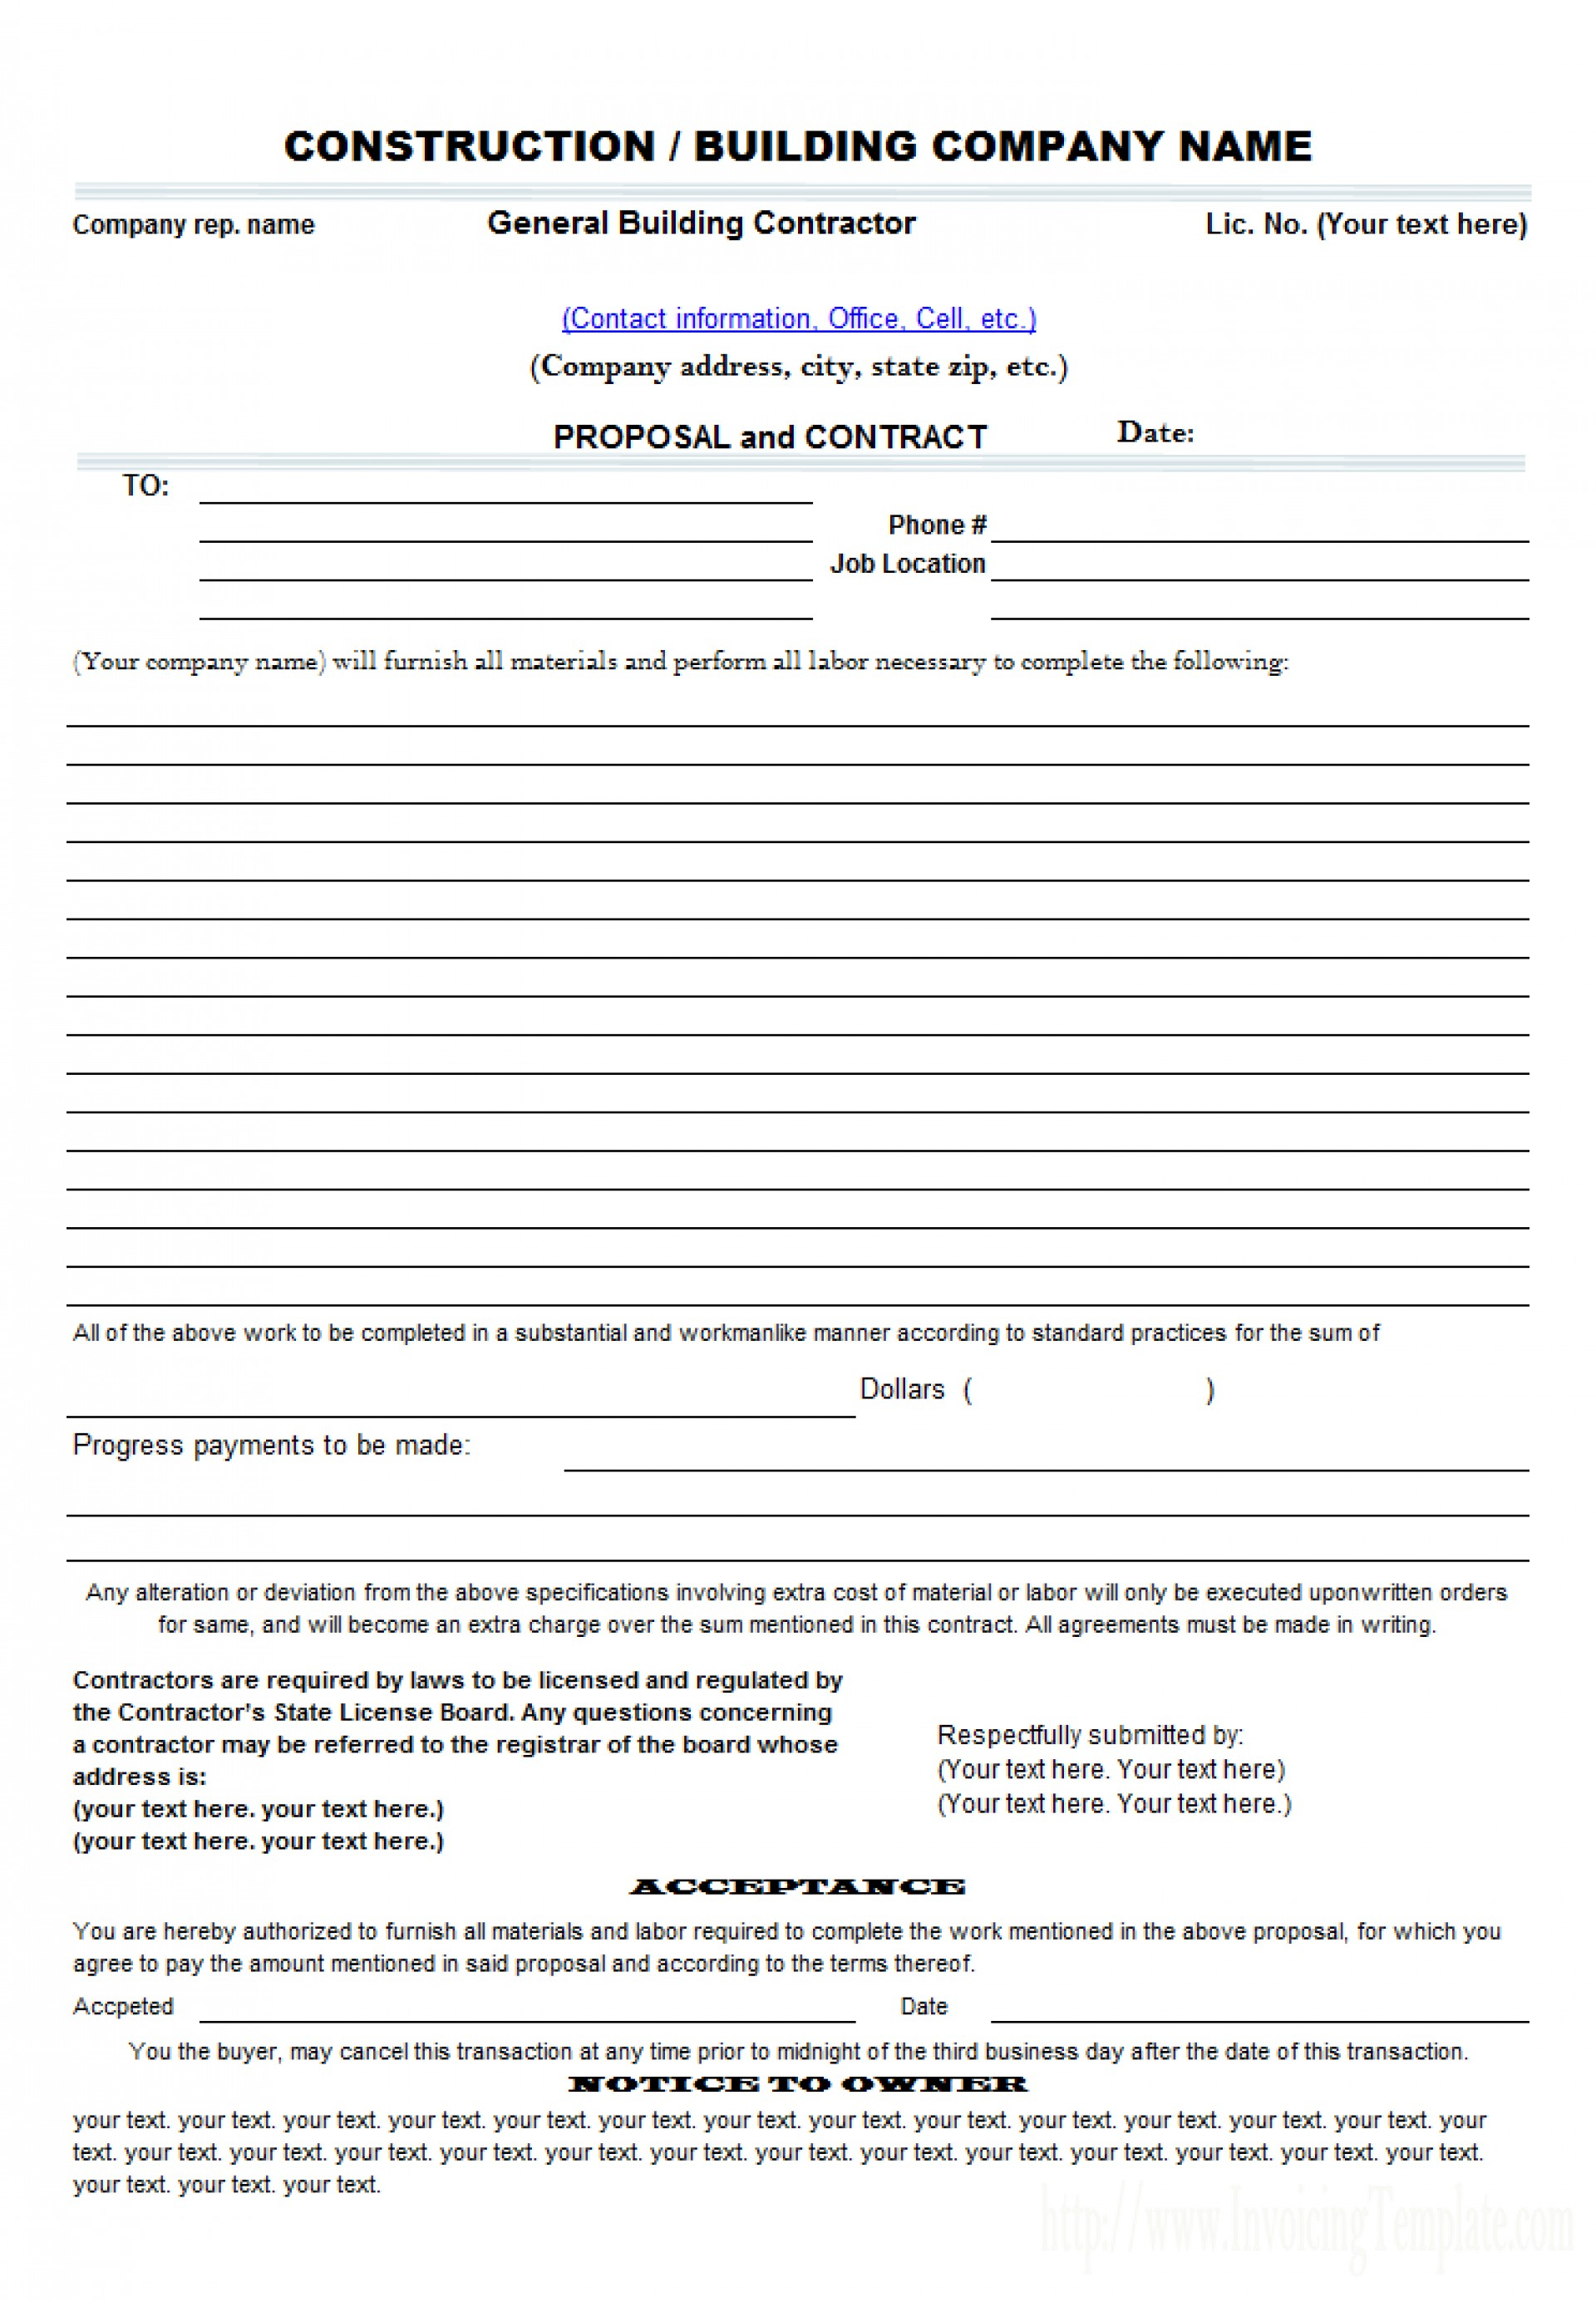 019 Free Construction Contract Template Excellent Ideas Sample - Free Printable Construction Contracts